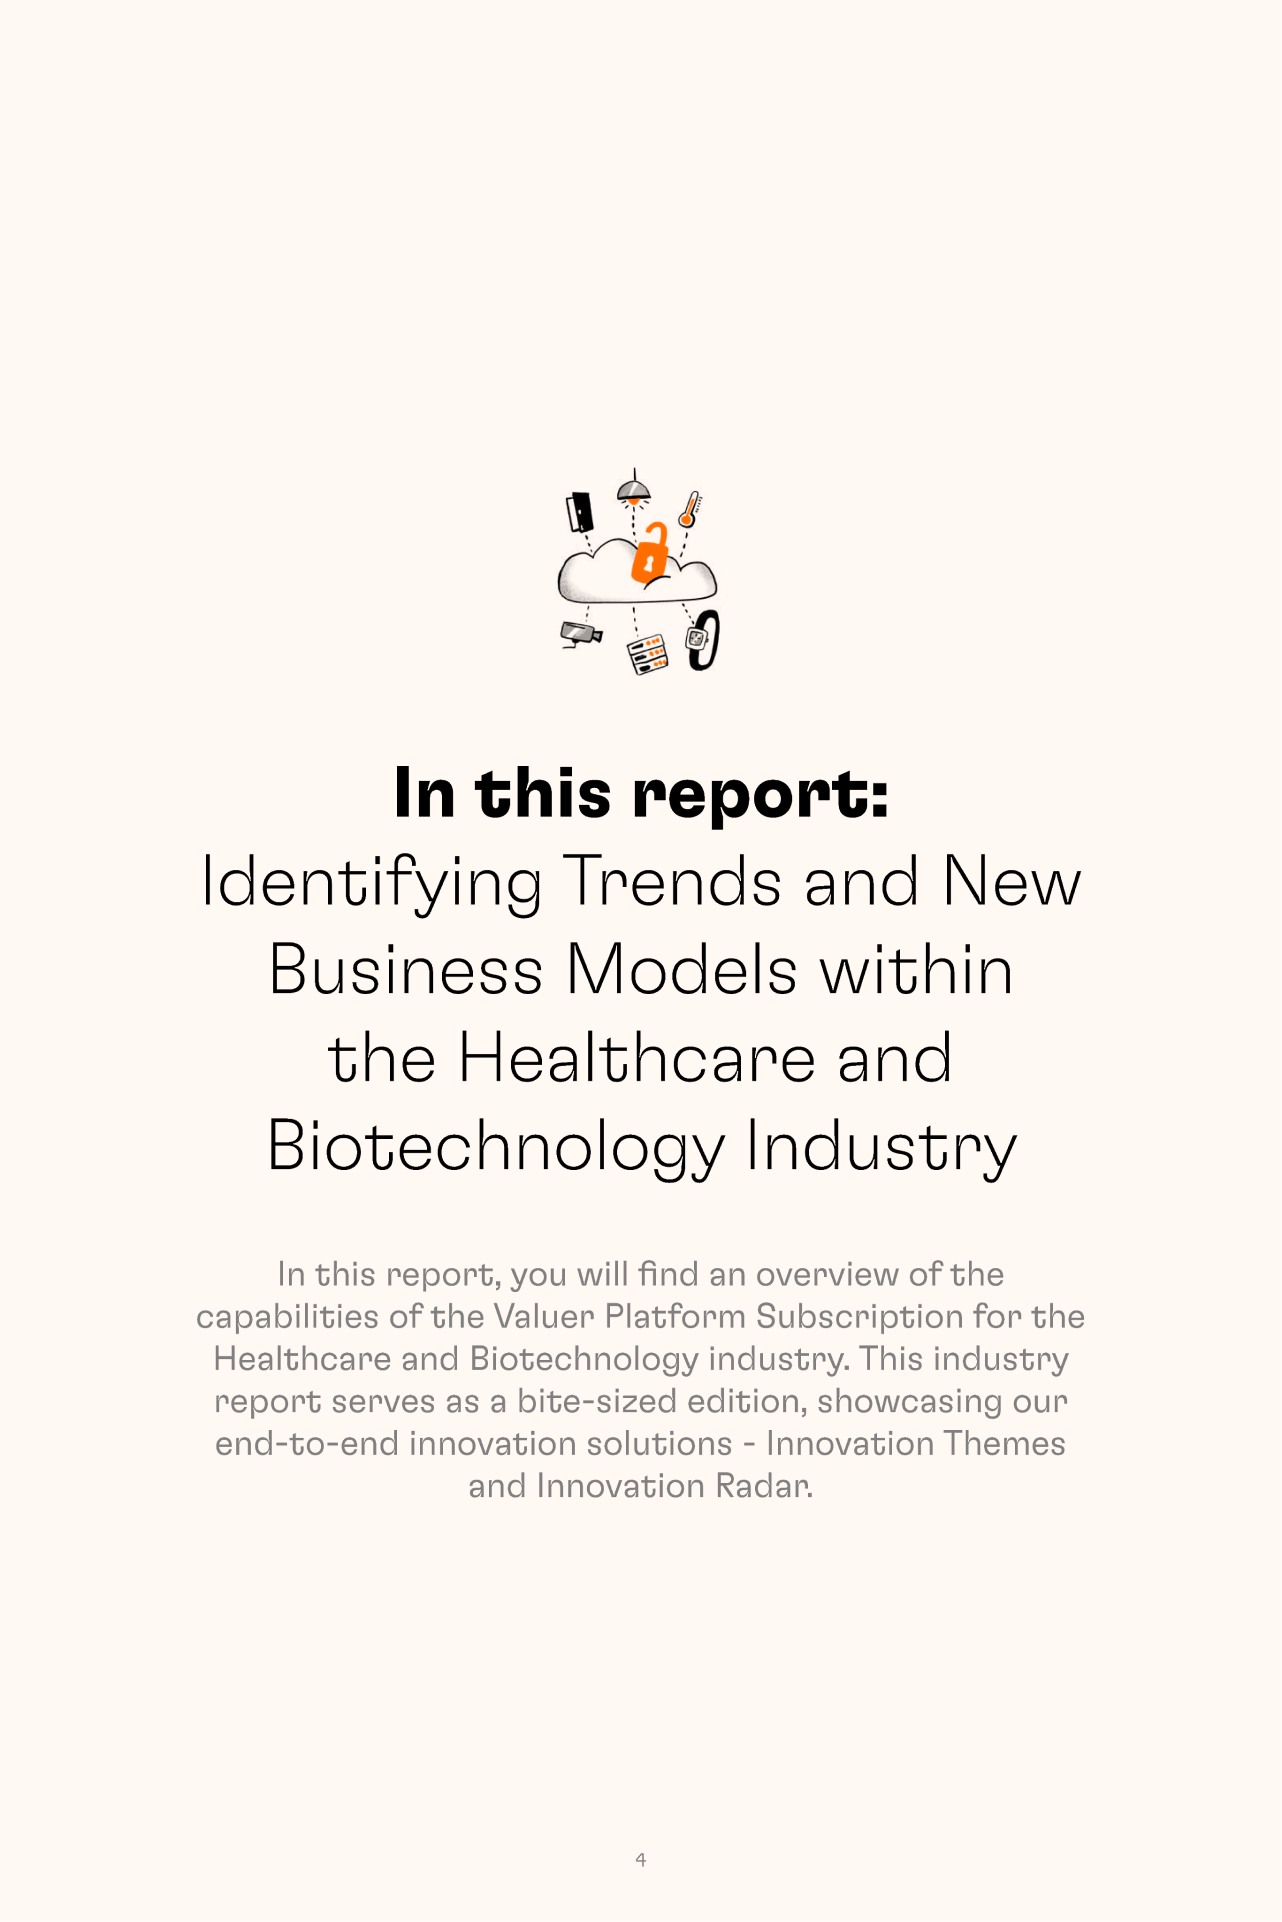 Healthcare and Biotechnology industry insights report overview